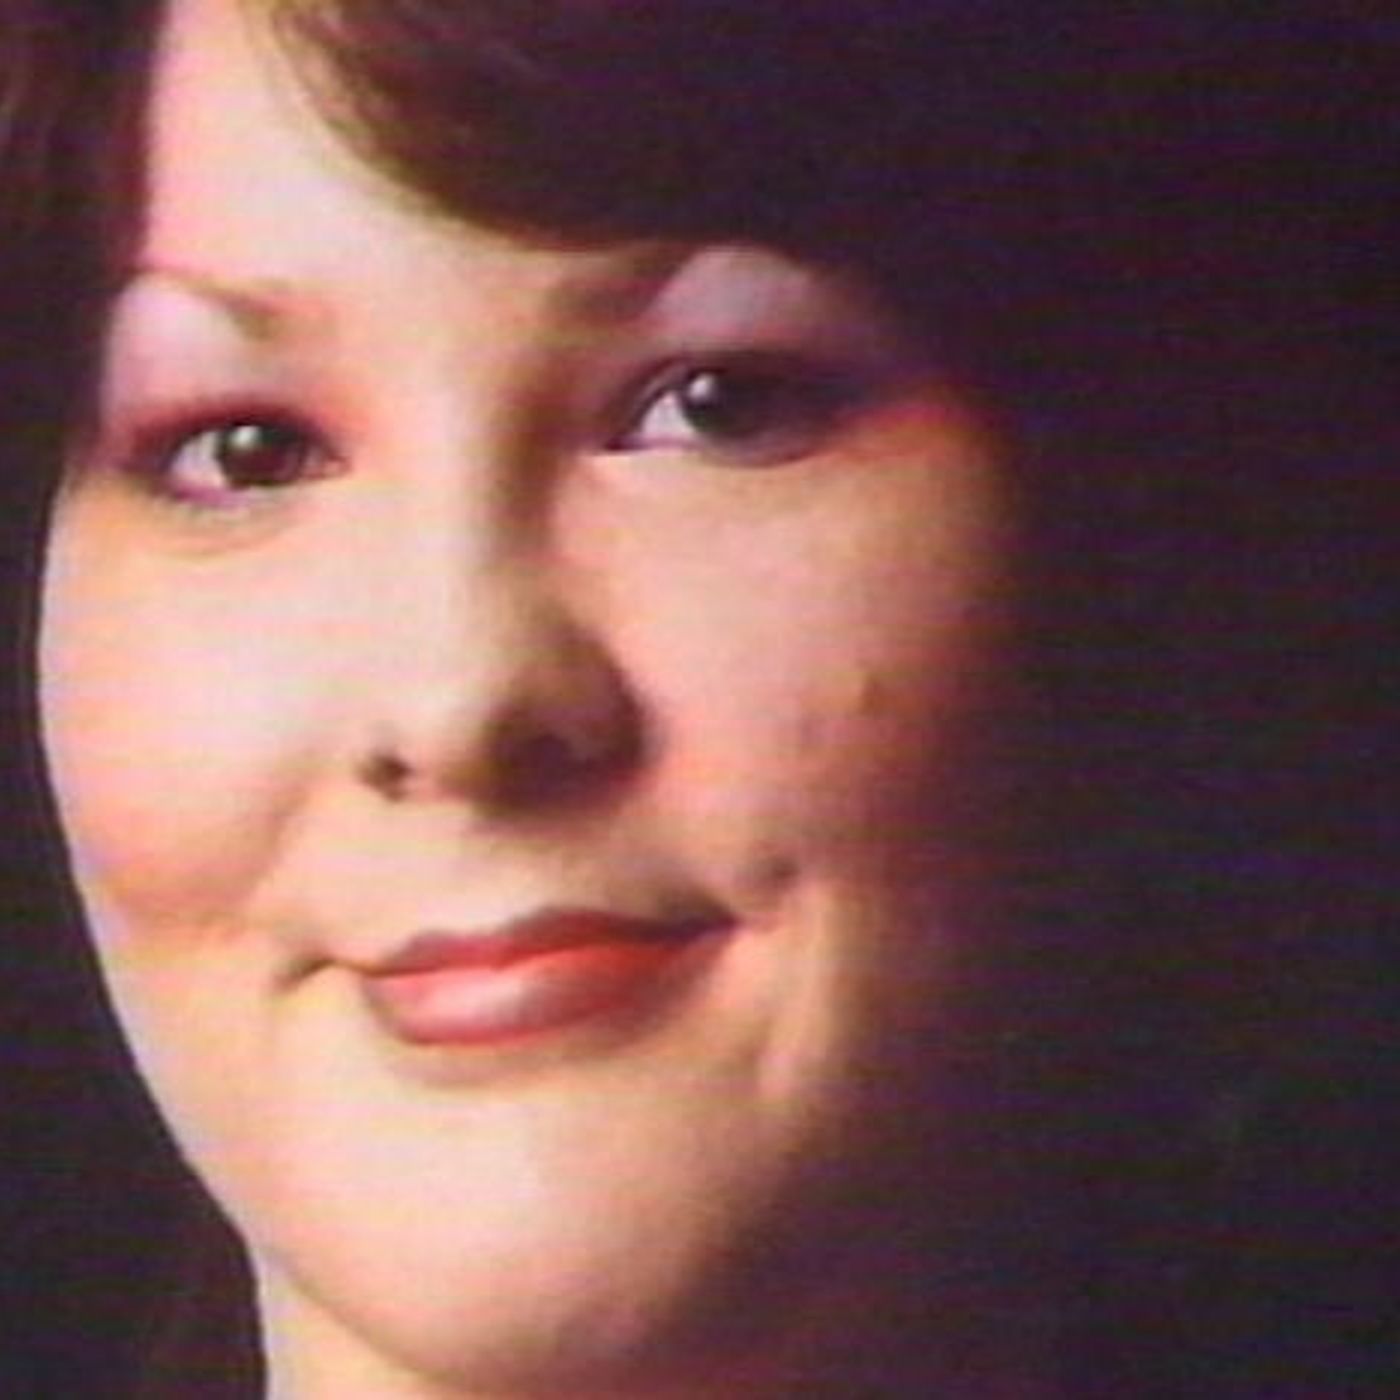 Ep 26 - The Disappearance of Sharron Phillips Part 1